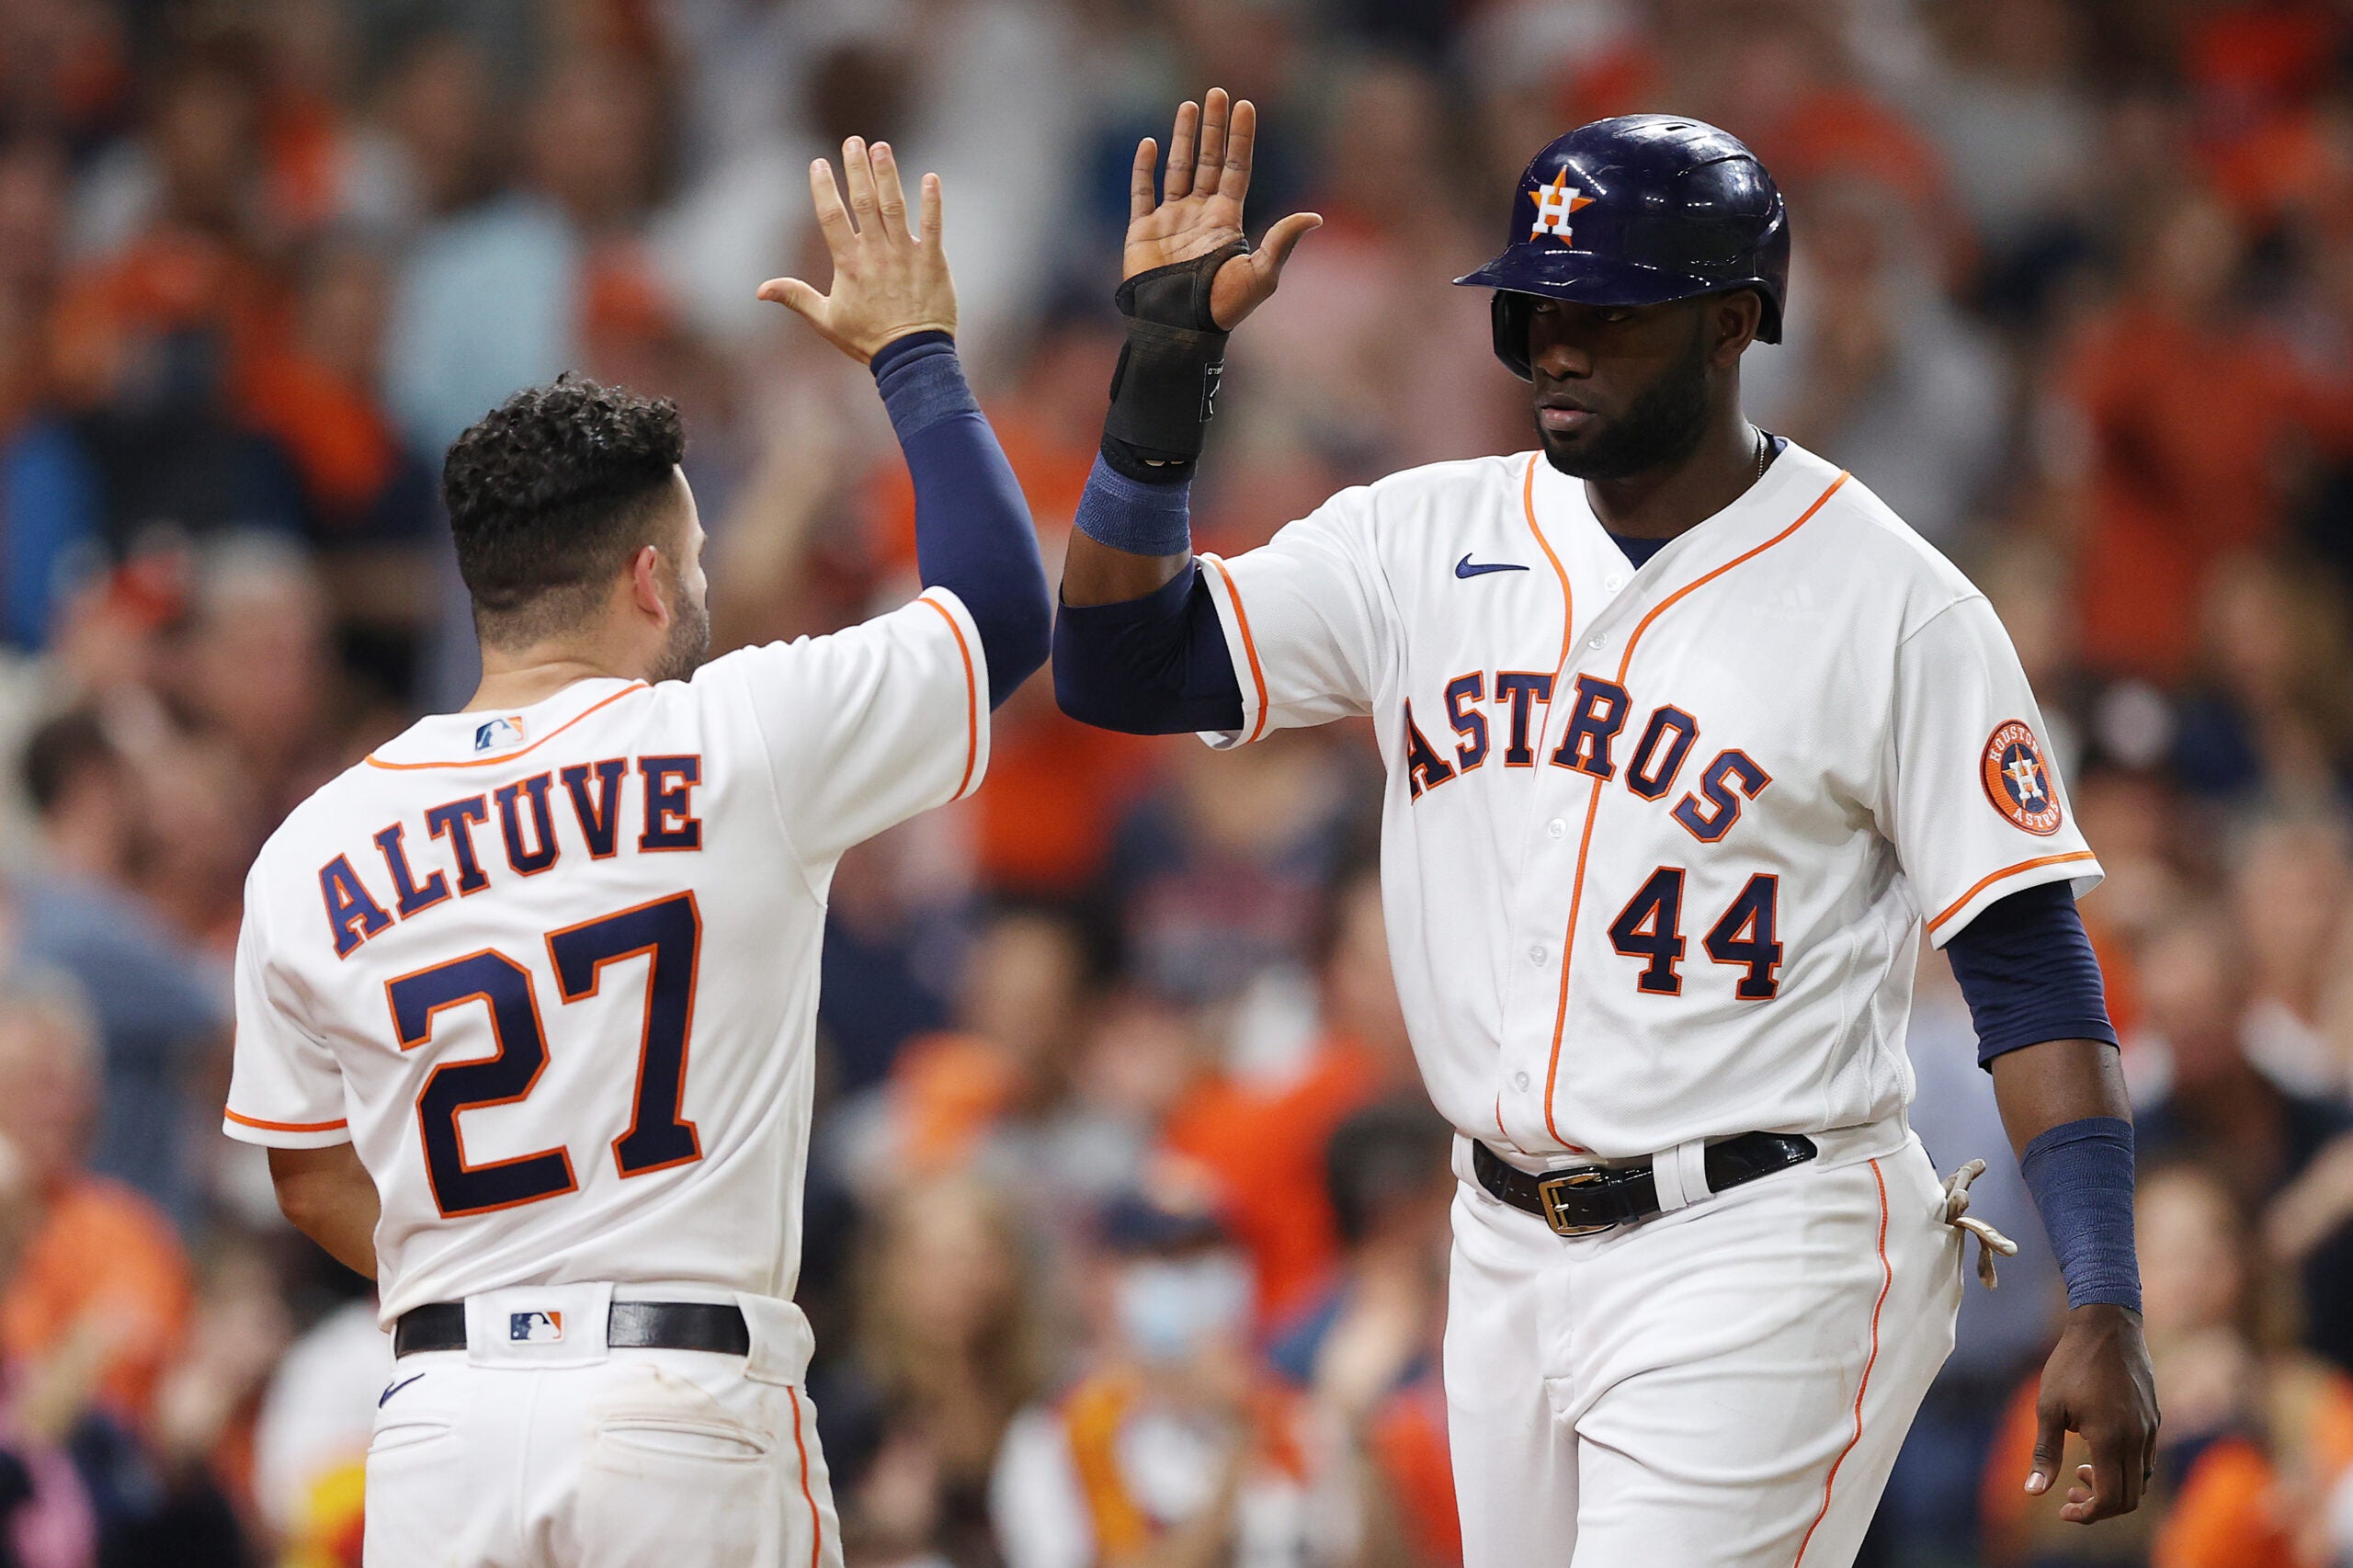 Red Sox Astros Game 6 takeaways